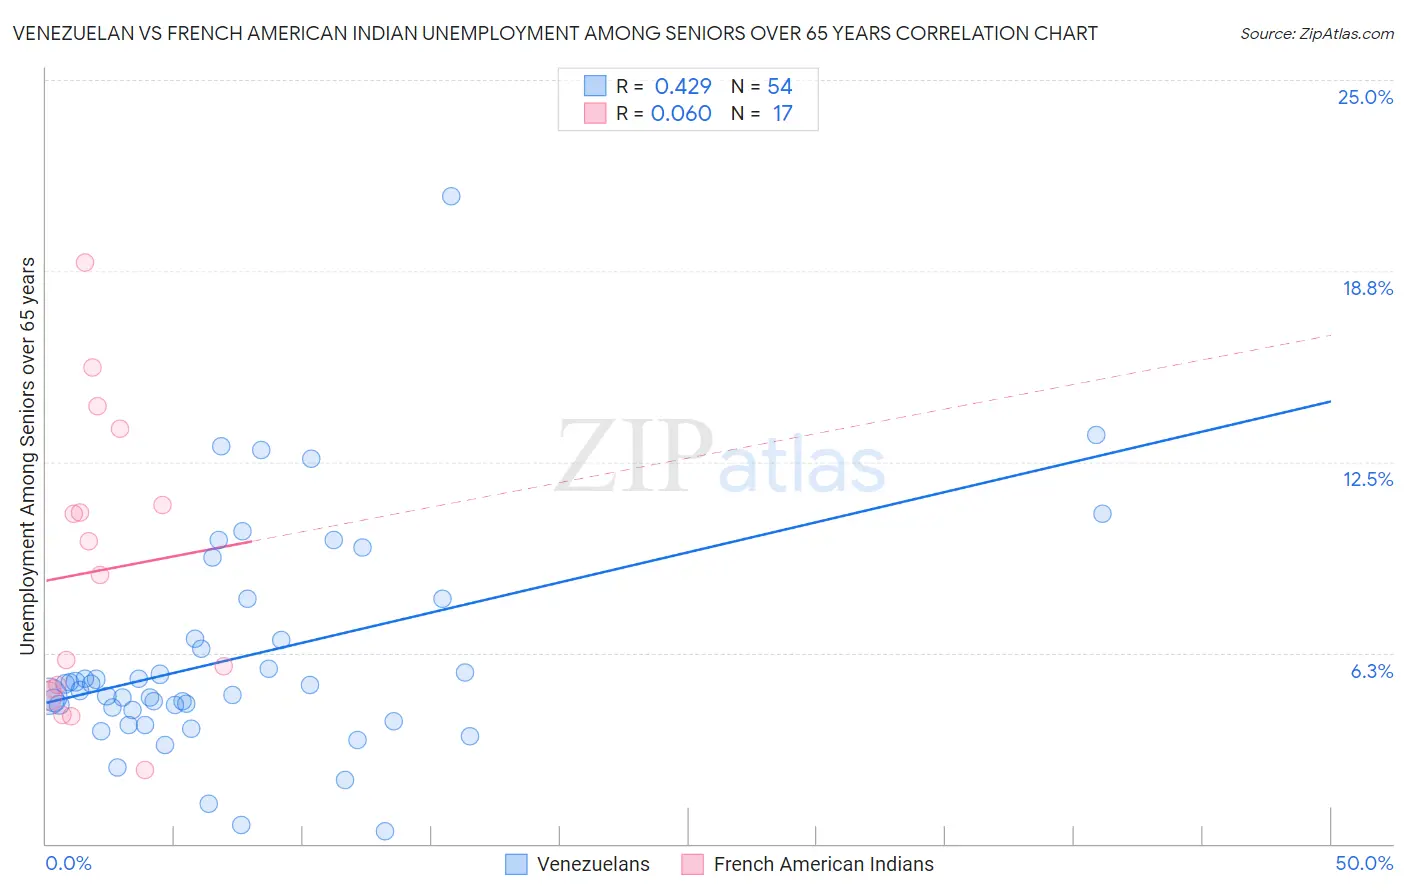 Venezuelan vs French American Indian Unemployment Among Seniors over 65 years